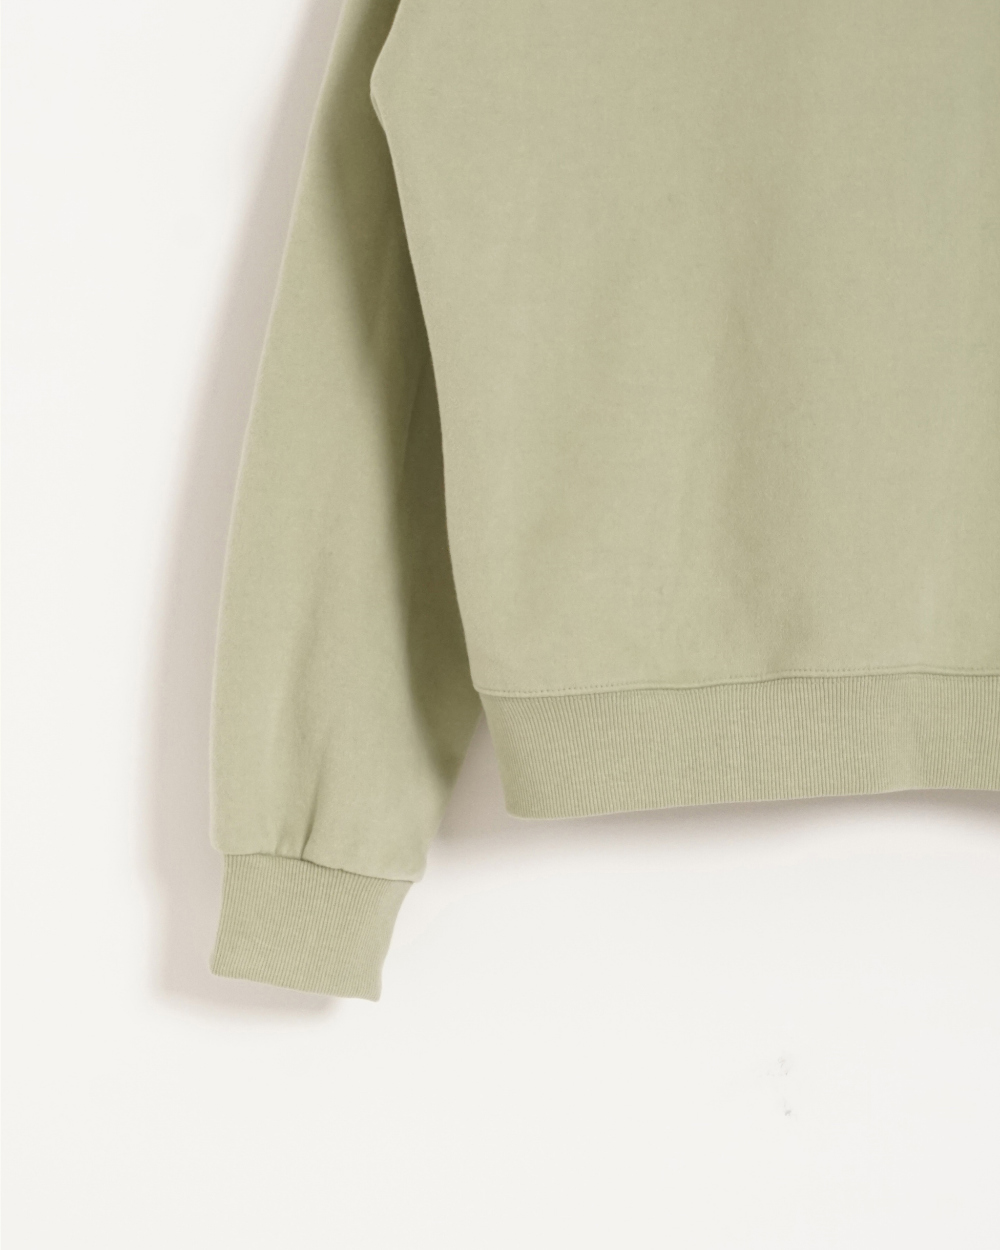 long sleeved tee detail image-S1L48